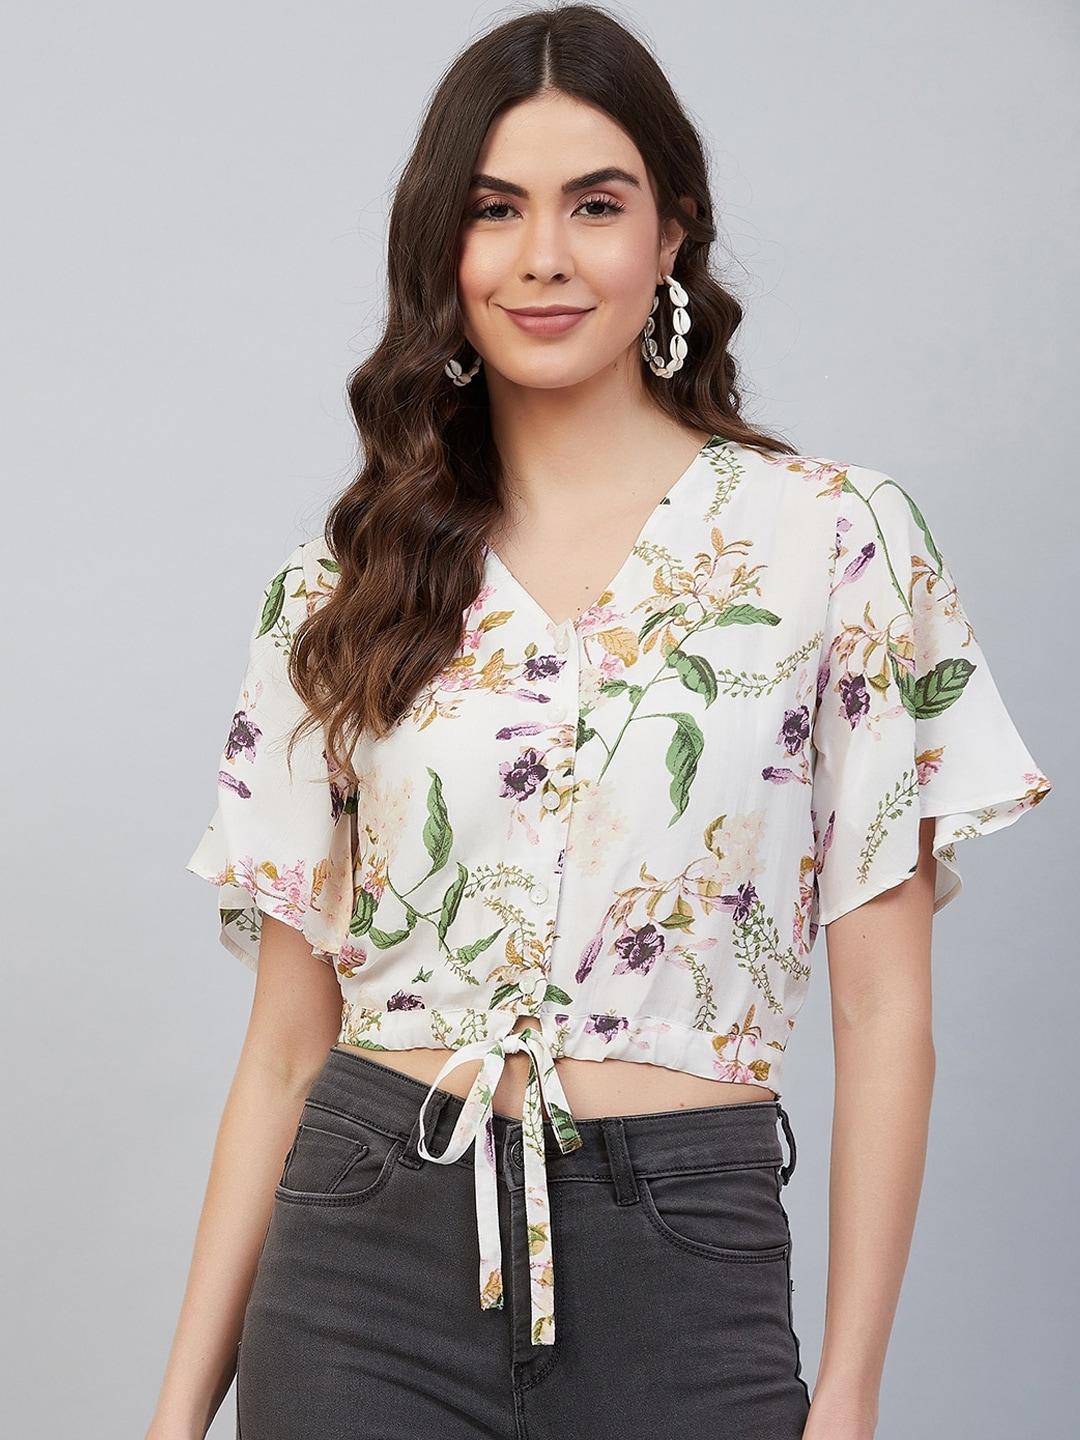 Marie Claire Multicoloured Floral Printed Wrap Crop Top